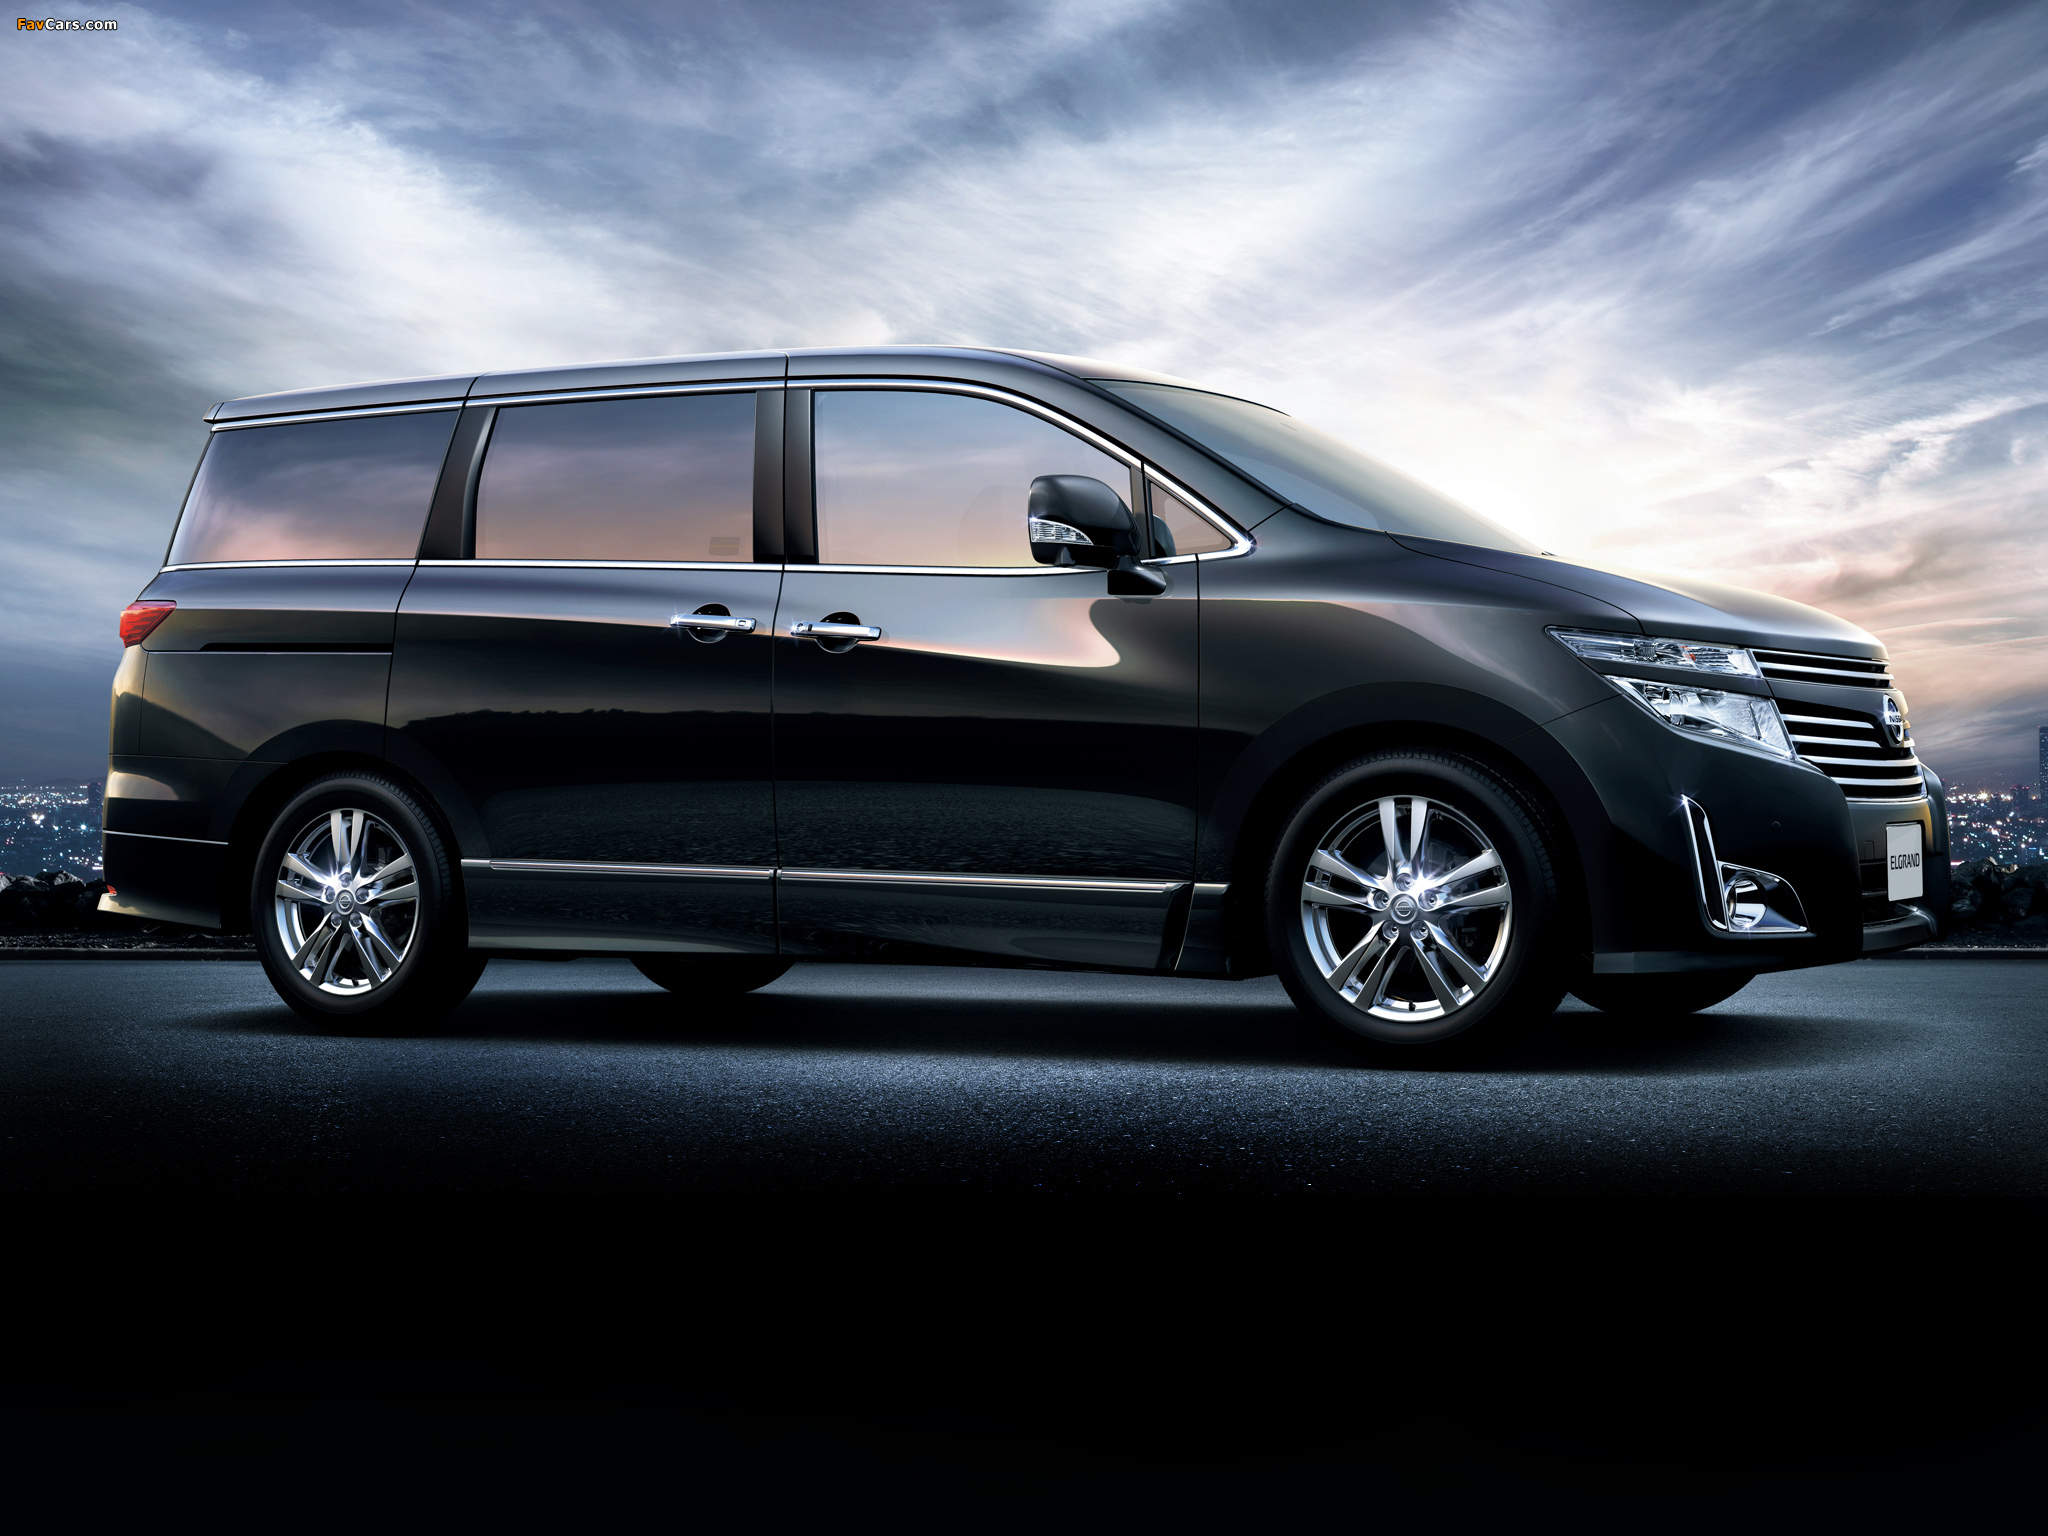 Nissan Elgrand Highway Star (E52) 2010 pictures (2048 x 1536)